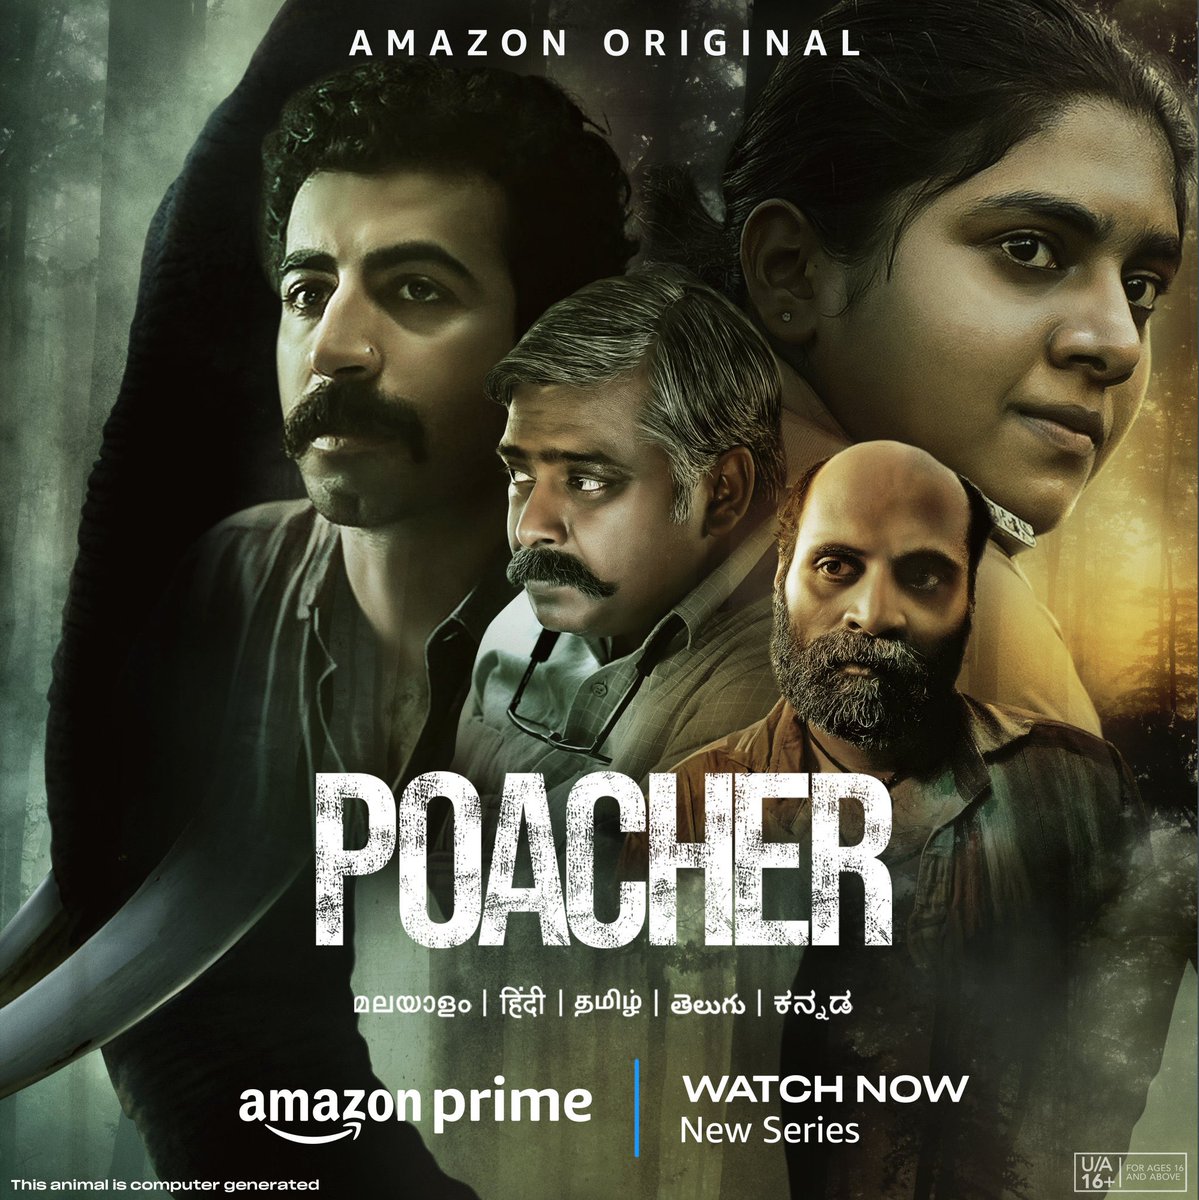 Just completed watching,#poacher season 1✅
Poacher is a world class series, take a bow to creator #RitchieMehta, smart casting by @CastingChhabra, this is an emotional ode to the nature.
#elephant #saveelephant